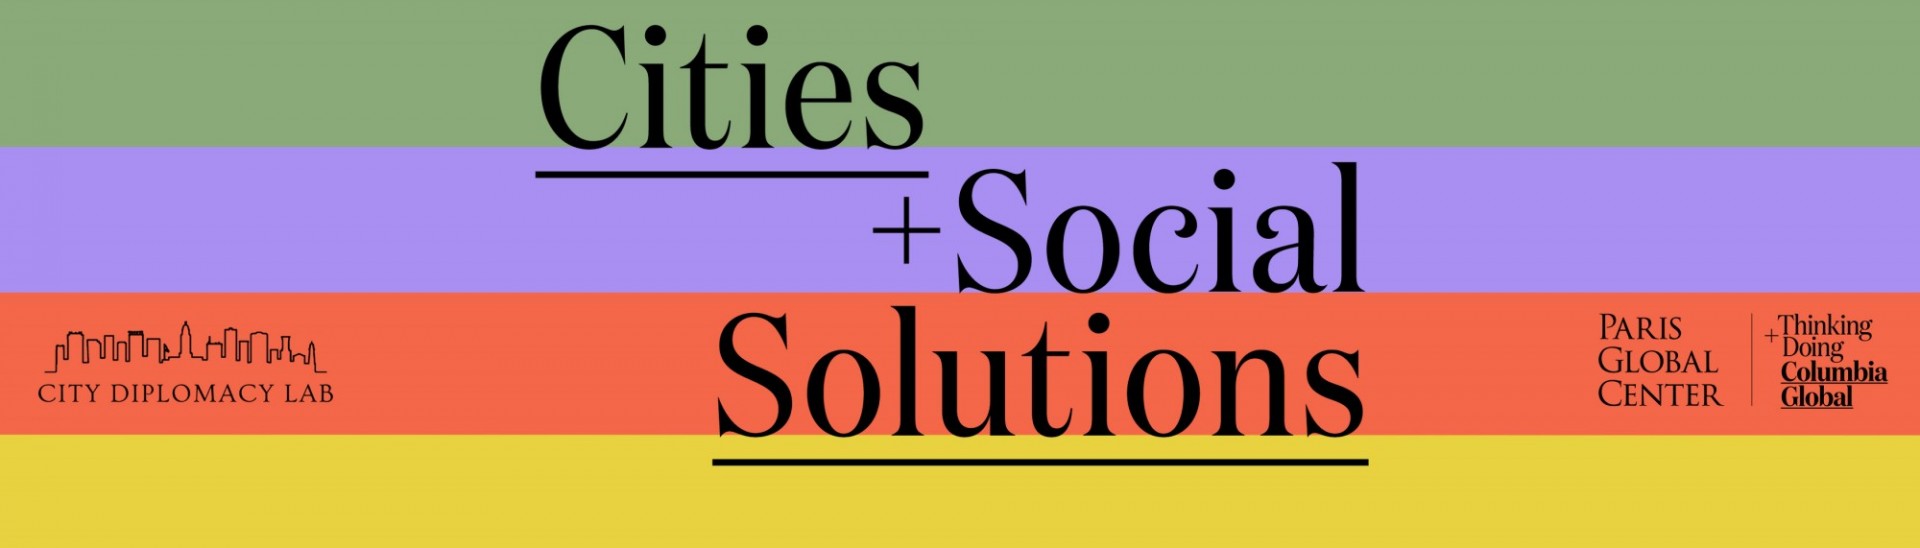 Introducing our new webinar series: Cities and Social Solutions